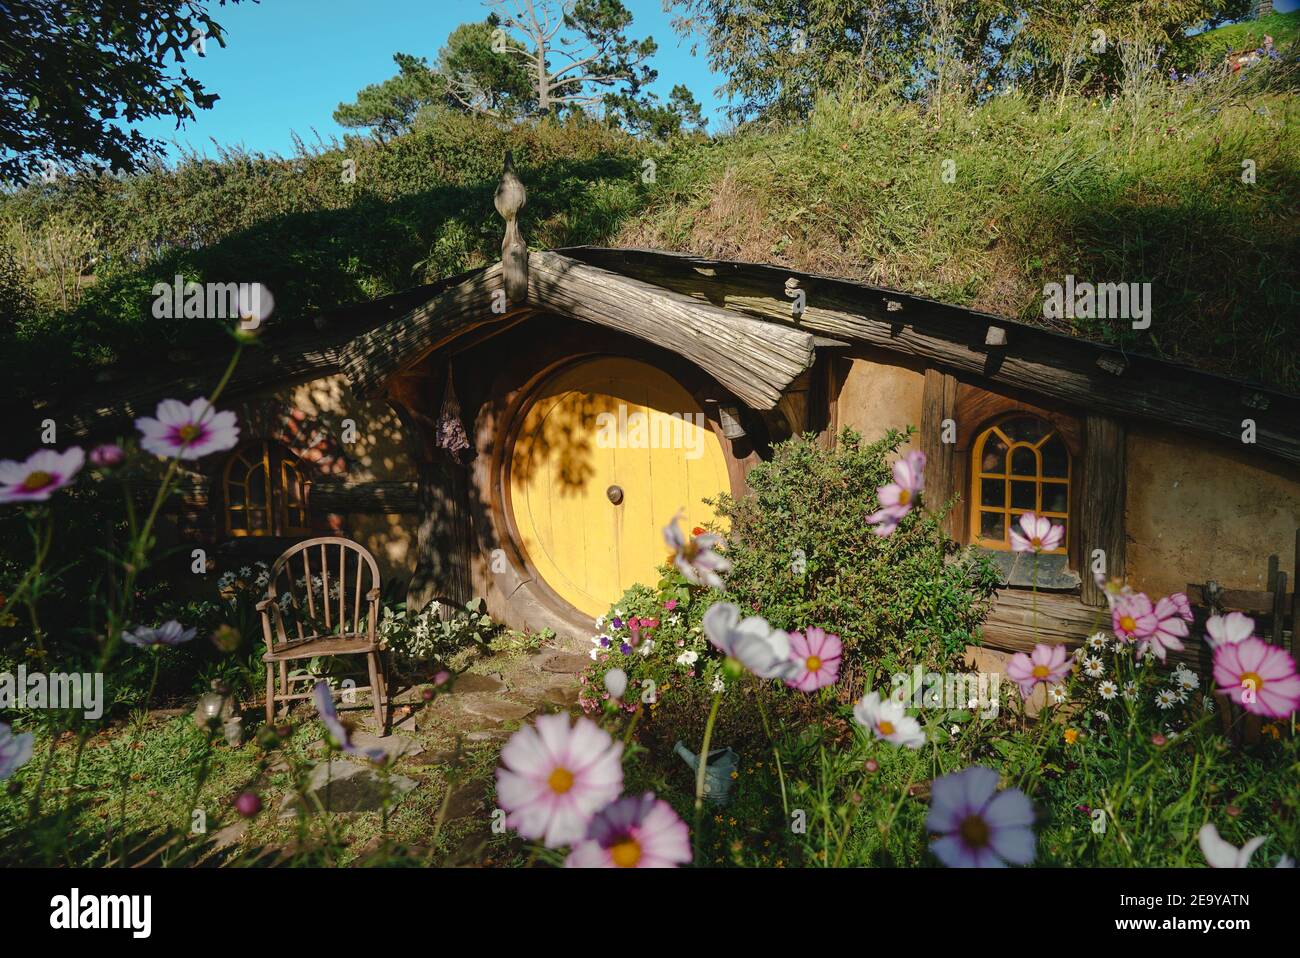 Hobbit Hole at The Shire in New Zealand Stock Photo